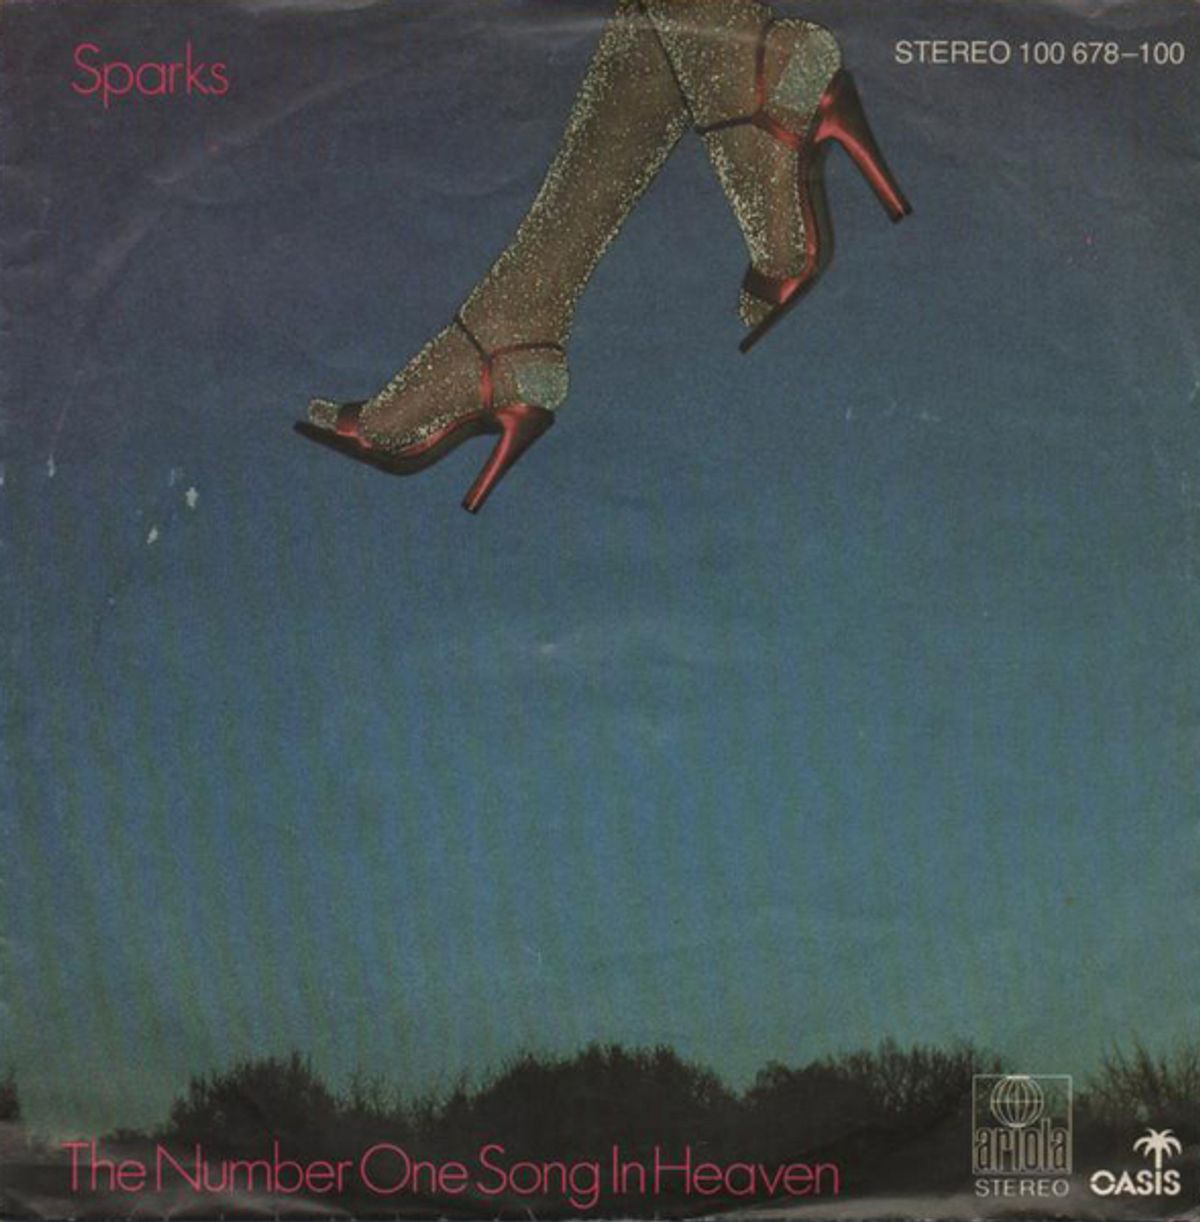 #LloydColeKiest - Sparks - The Number One Song In Heaven (1979)